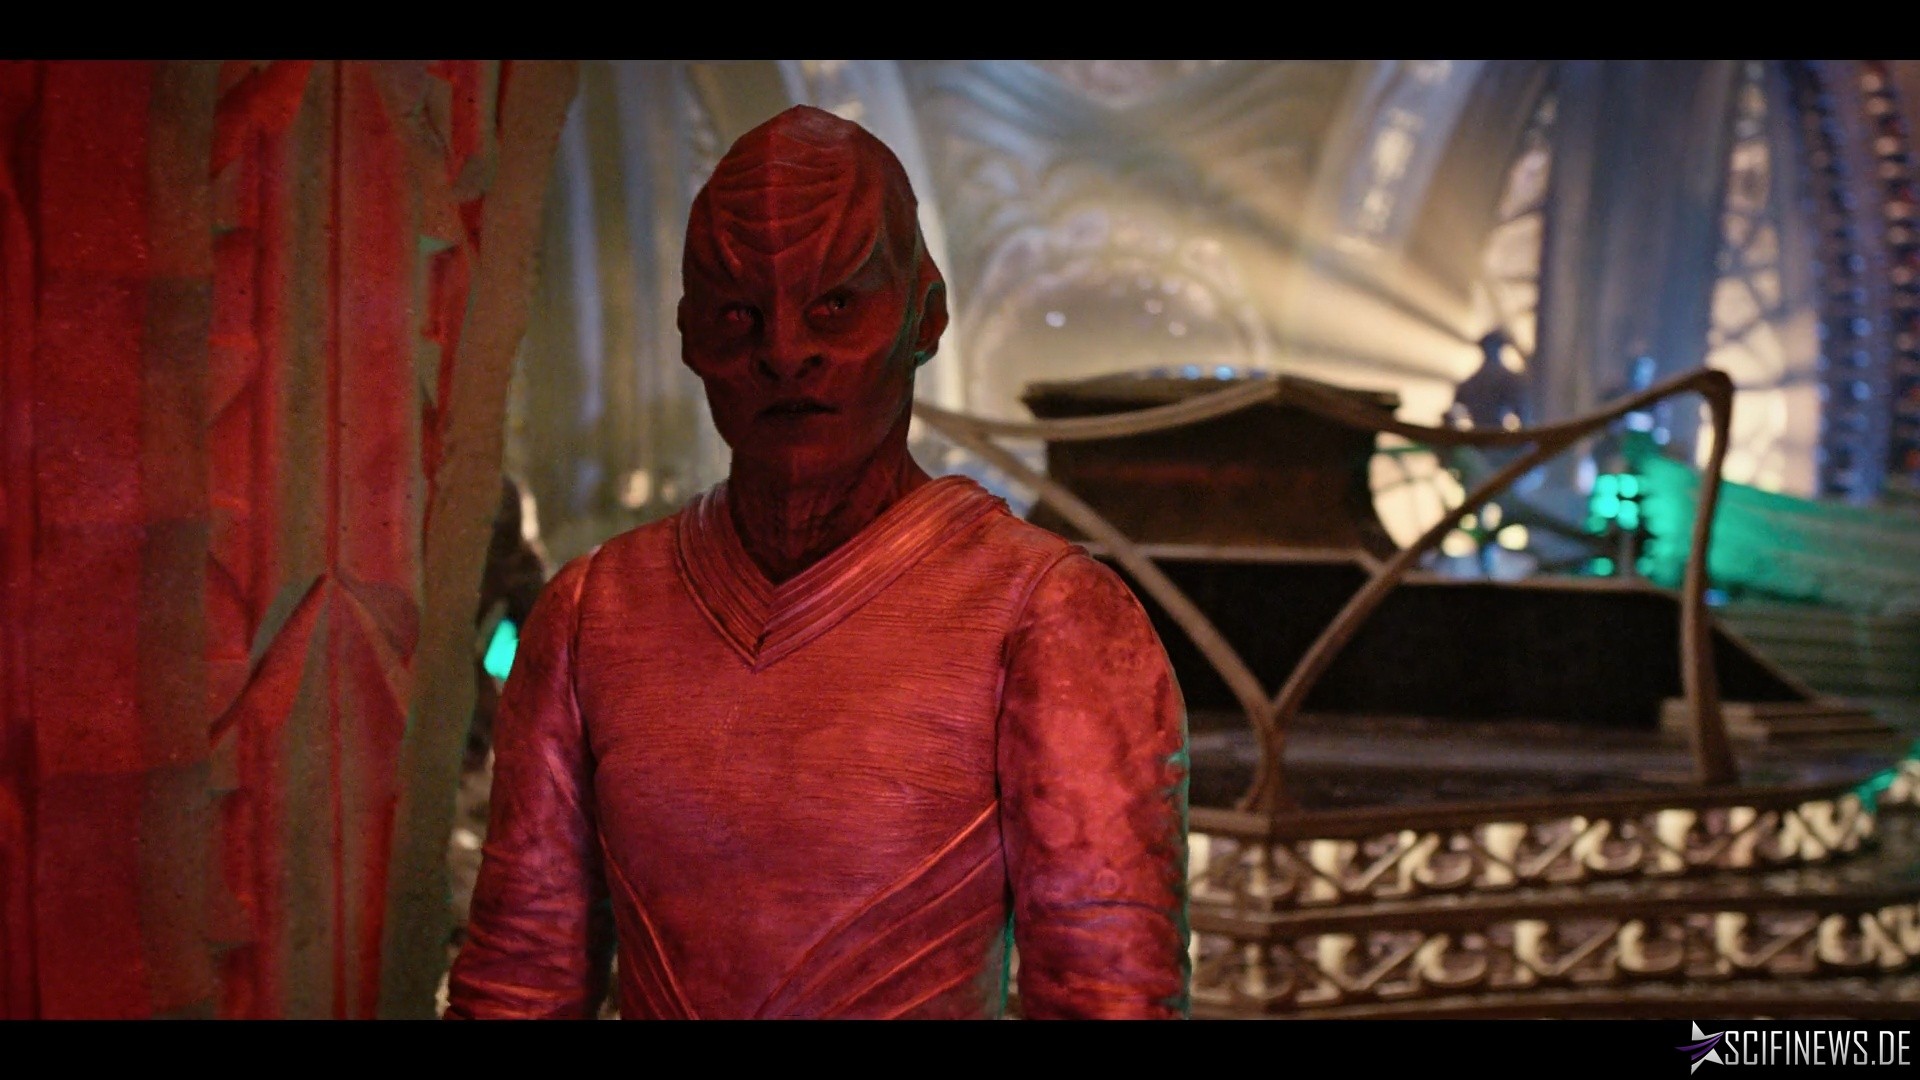 Star Trek Discovery - 1x04 - The Butchers Knife Cares Not for the Lambs Cry - 076.jpg